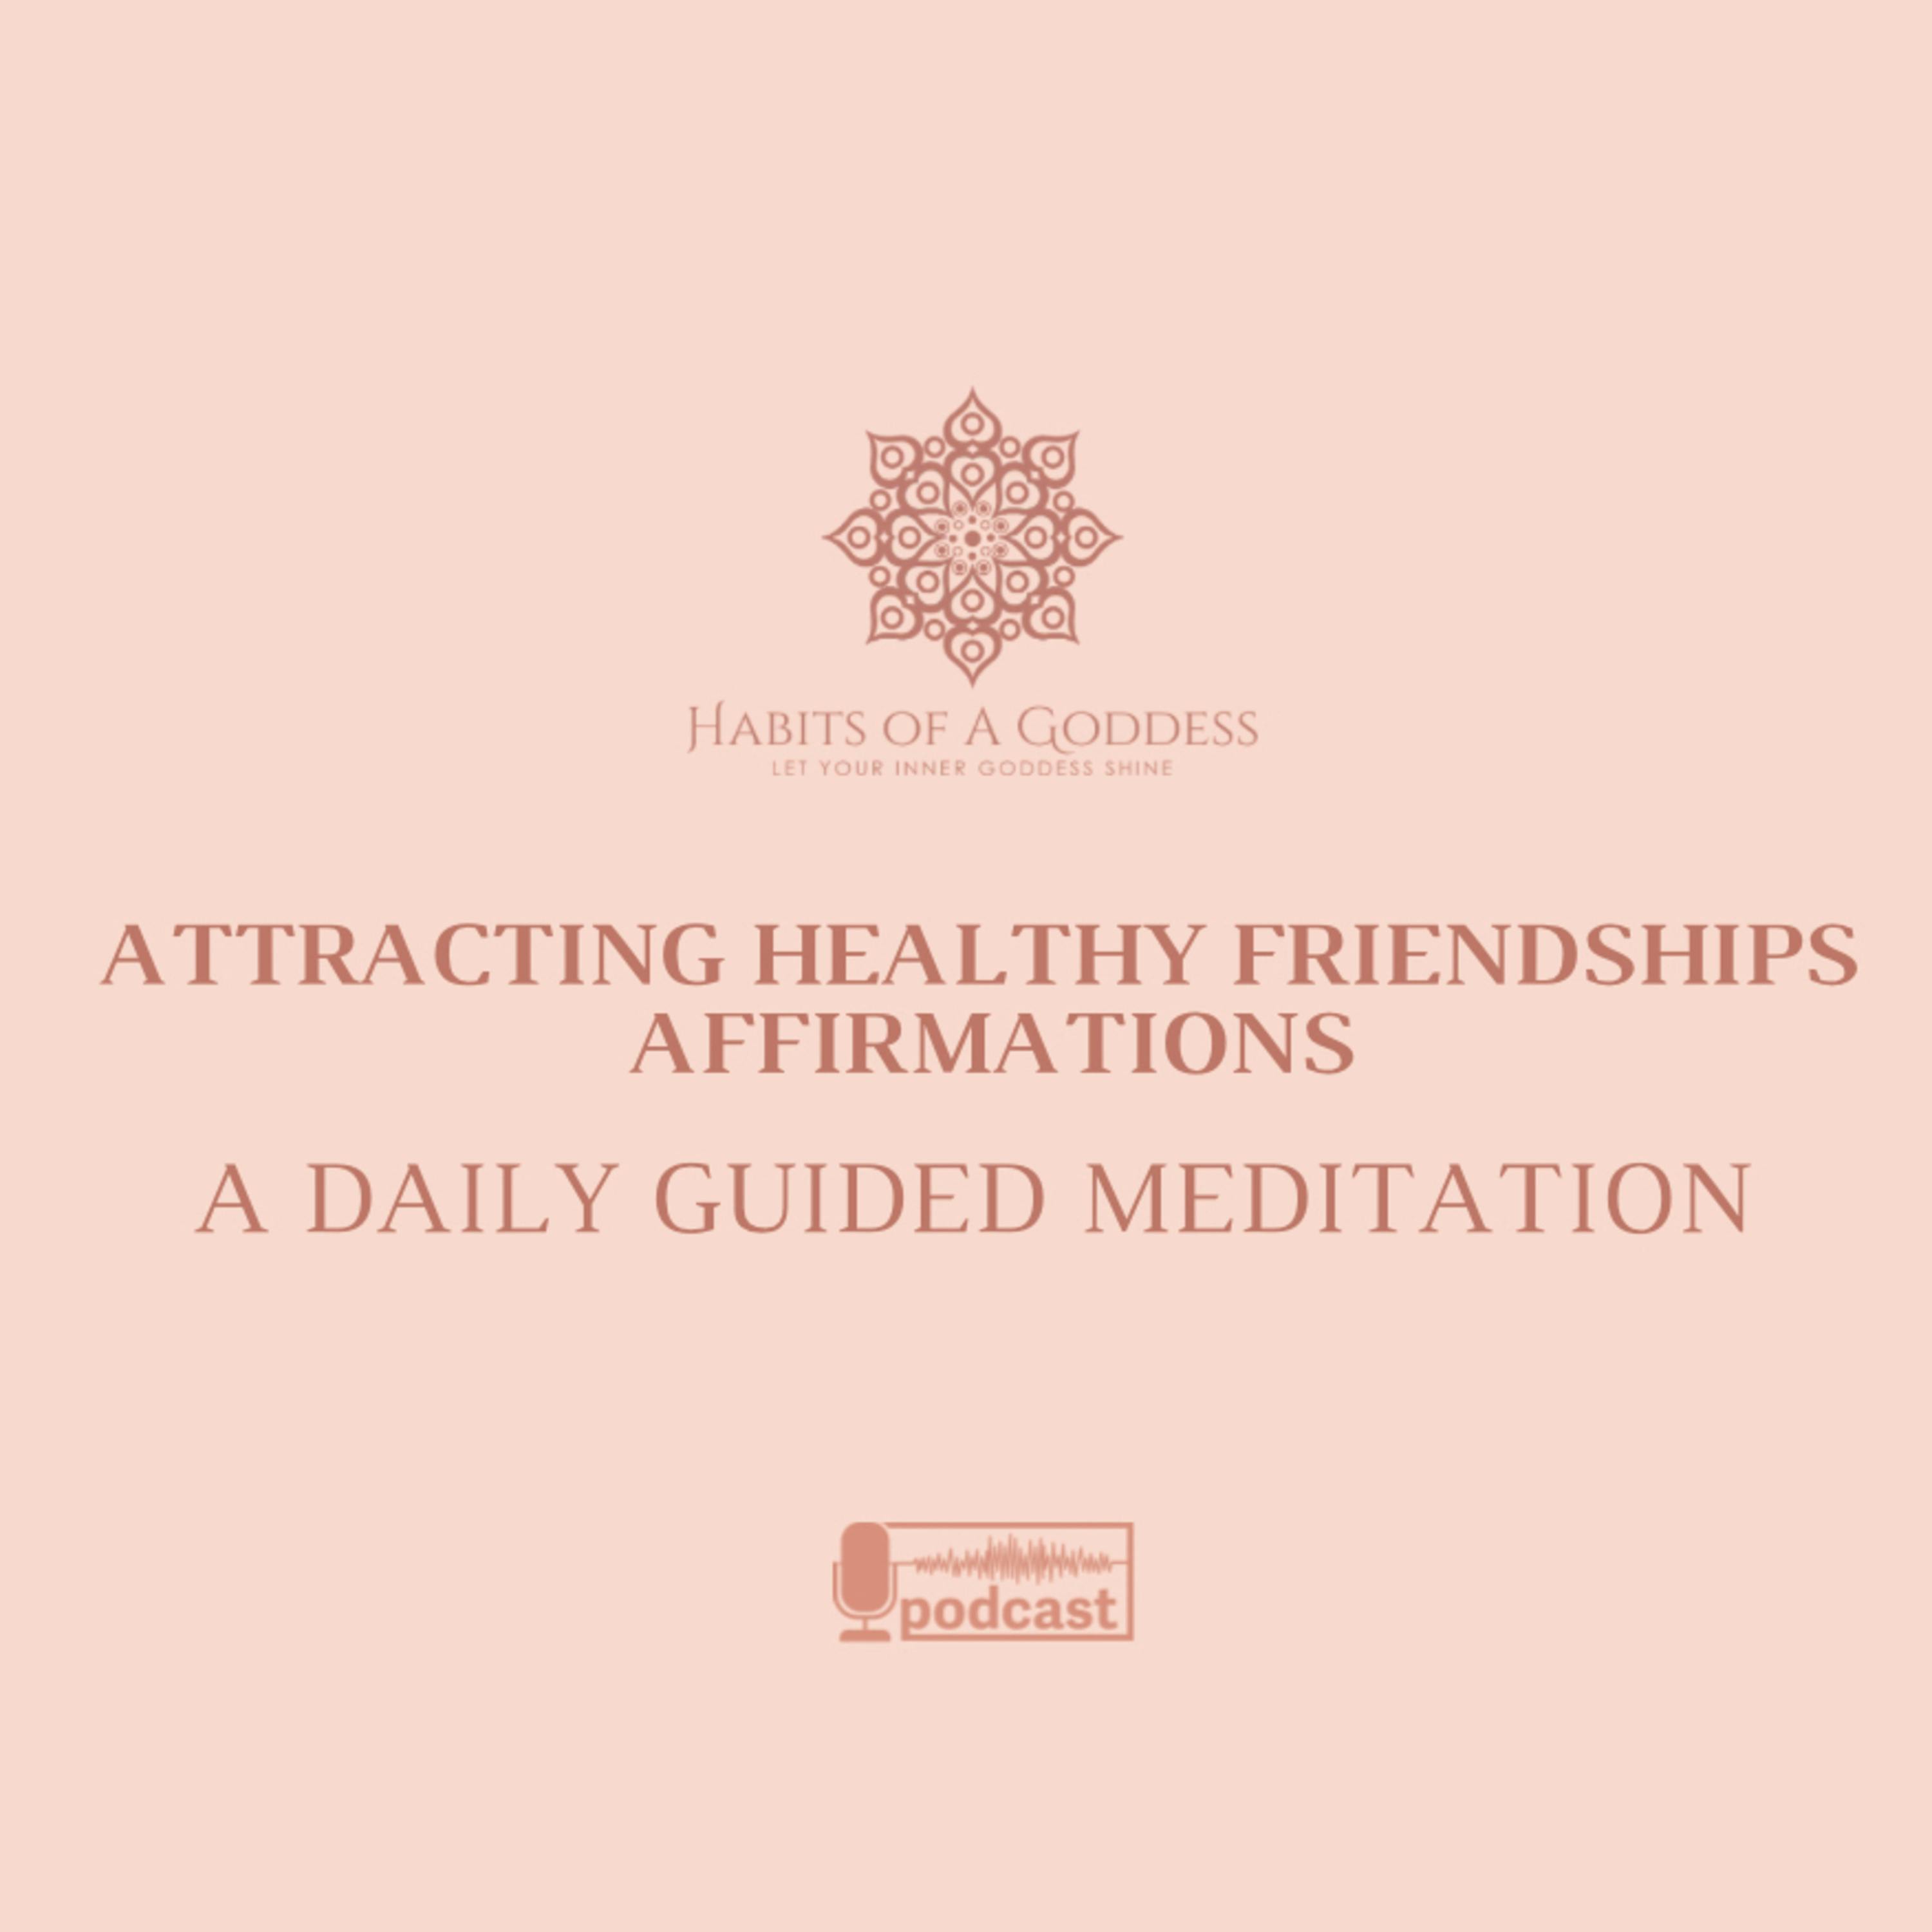 ATTRACTING HEALTHY FRIENDSHIPS AFFIRMATIONS | HABITS OF A GODDESS